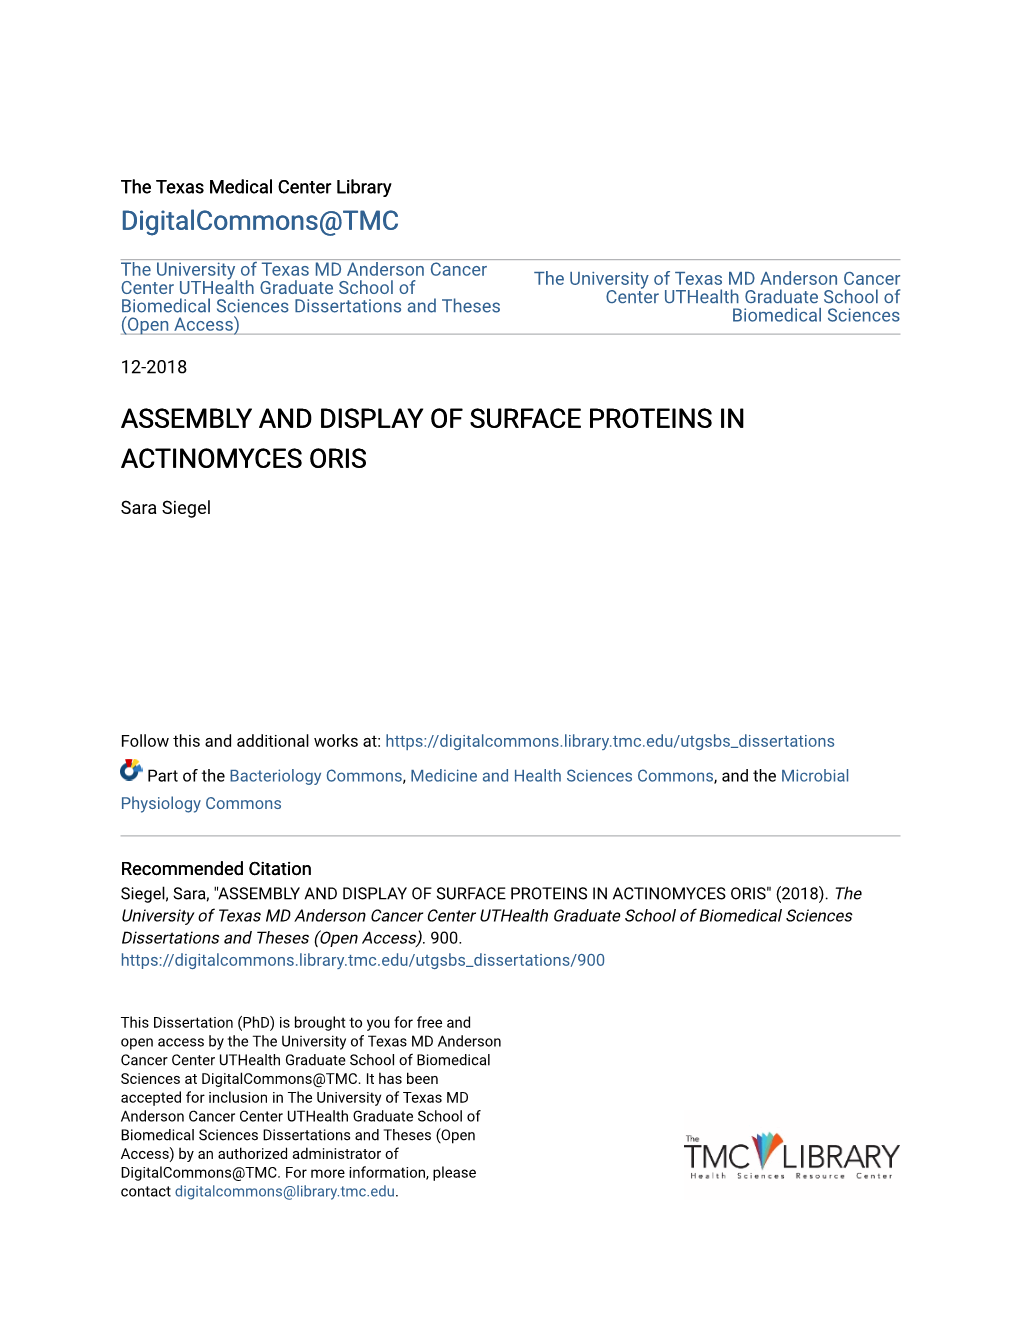 Assembly and Display of Surface Proteins in Actinomyces Oris